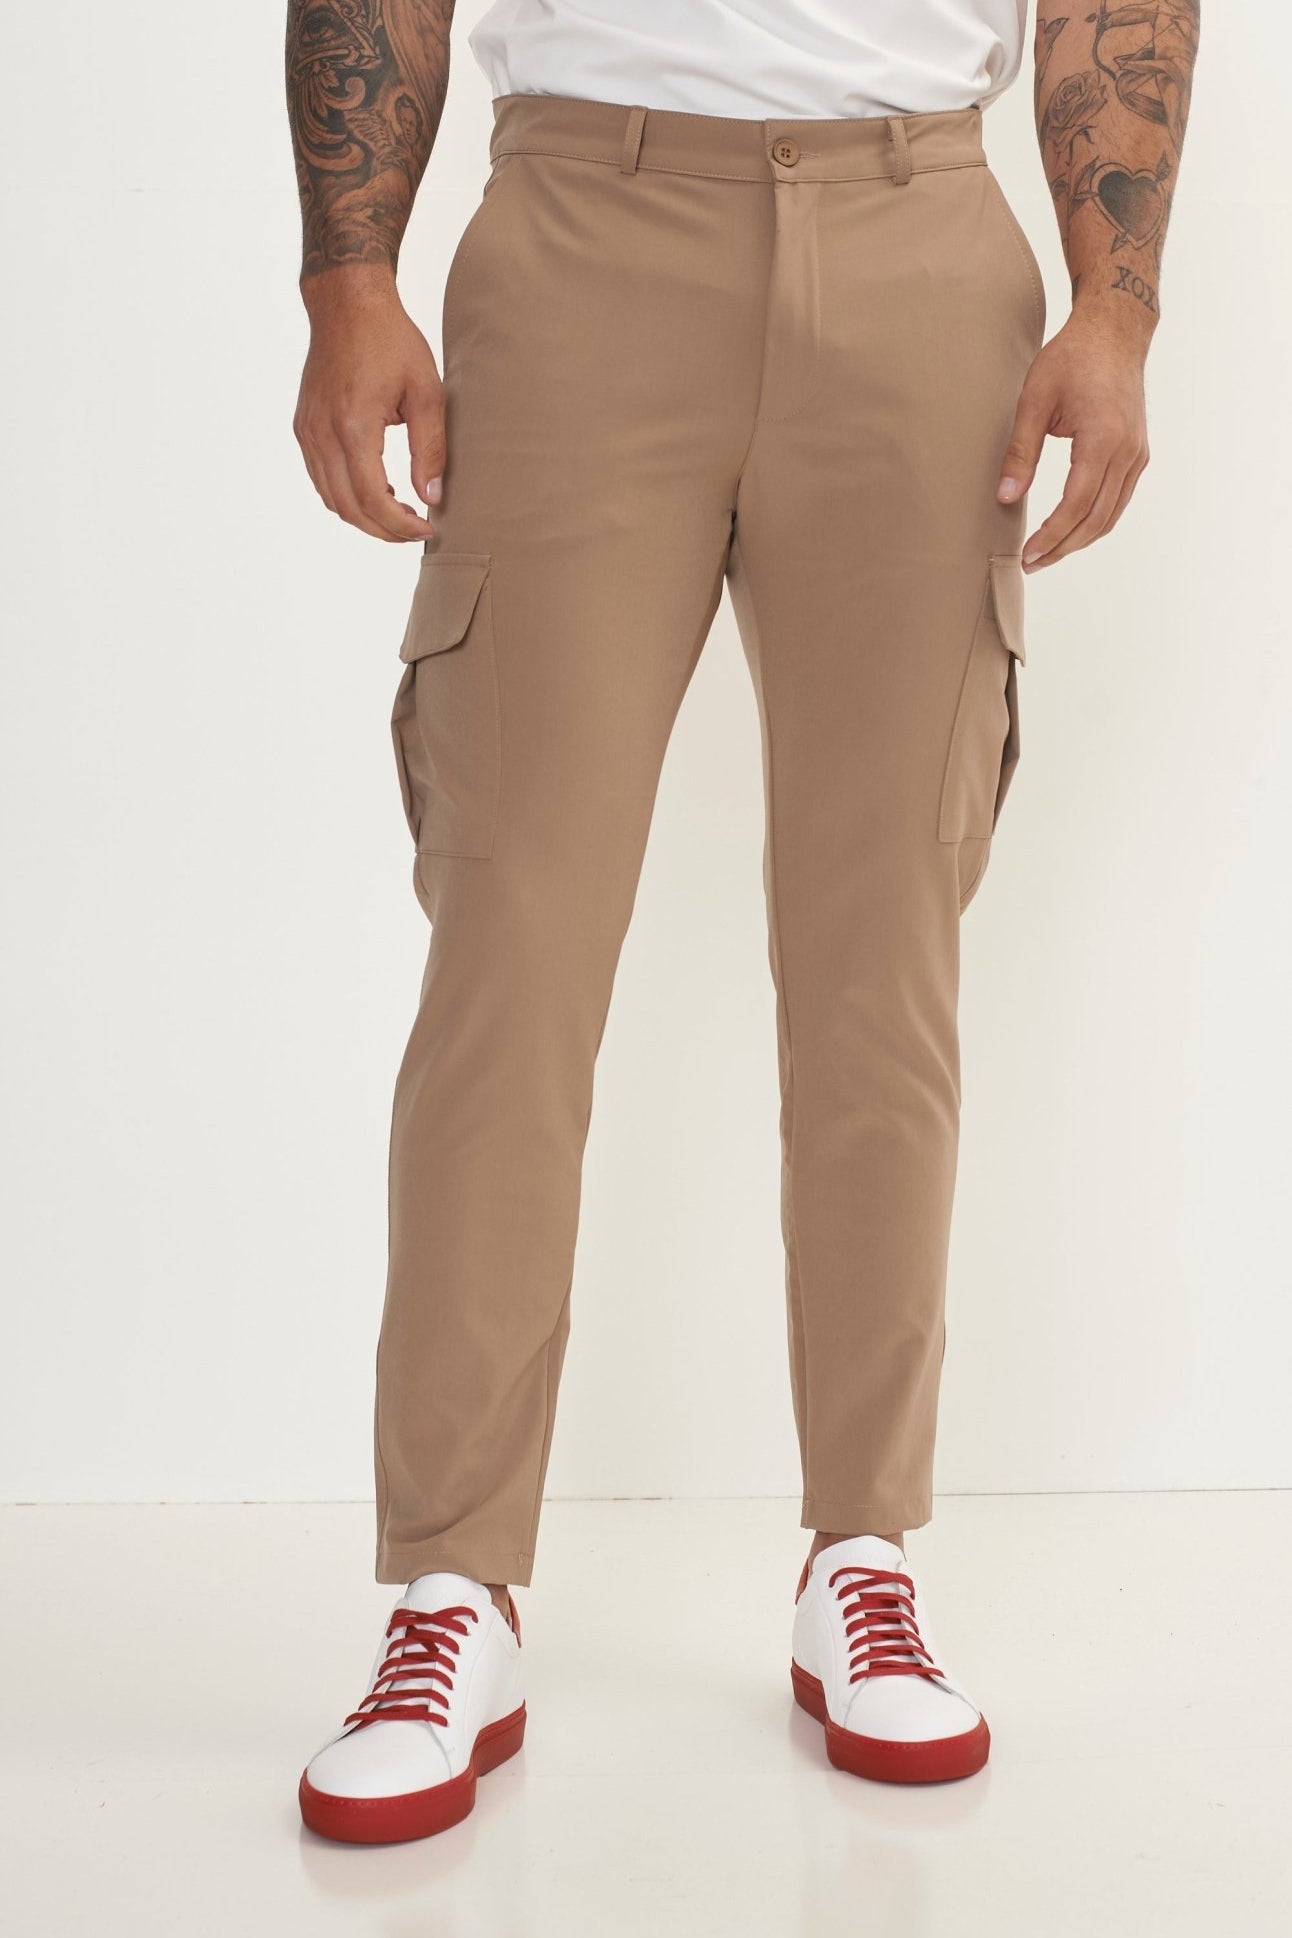 Tapered No-Wrinkle Utility Pants - Camel - Ron Tomson